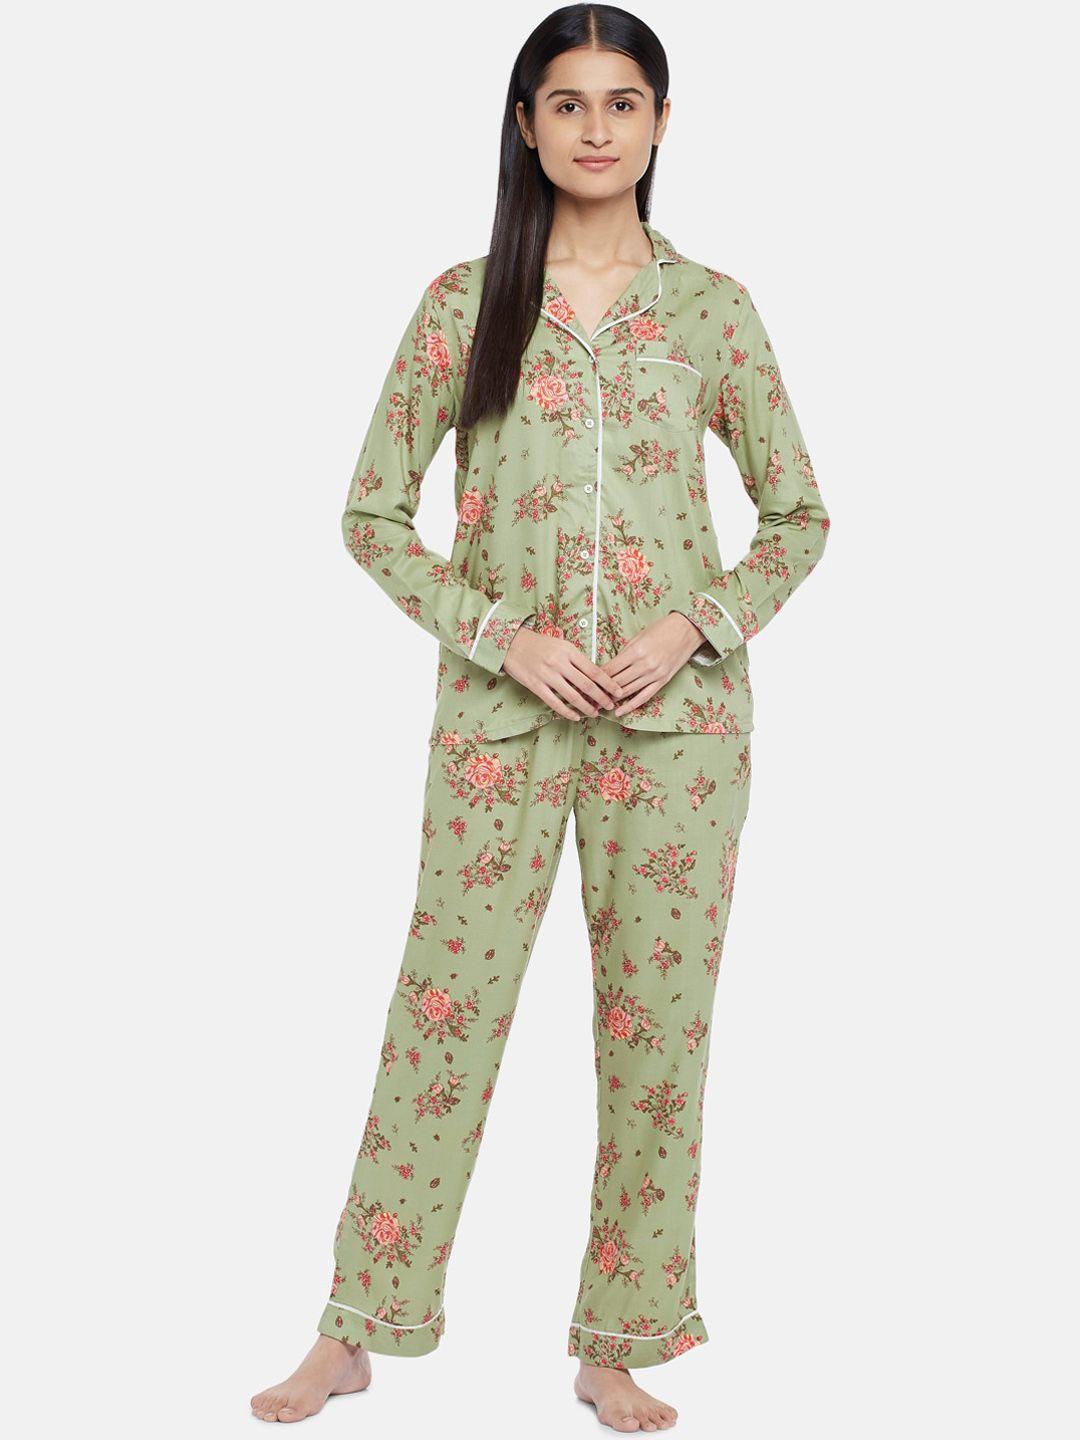 dreamz by pantaloons women green & red floral printed night suit